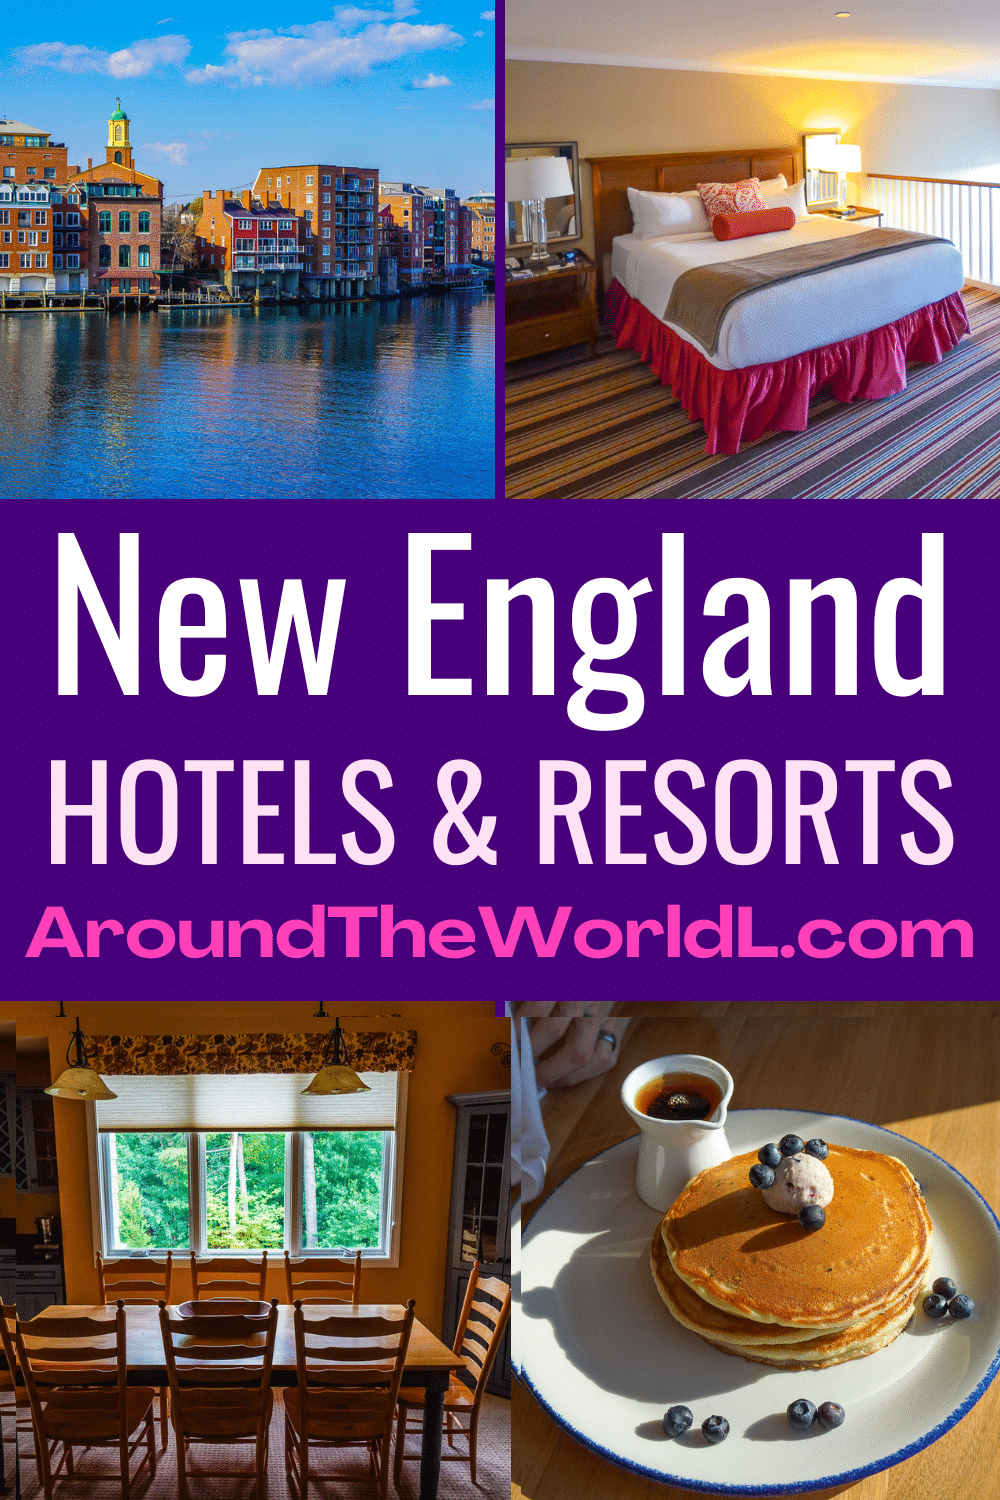 New England hotels and resorts